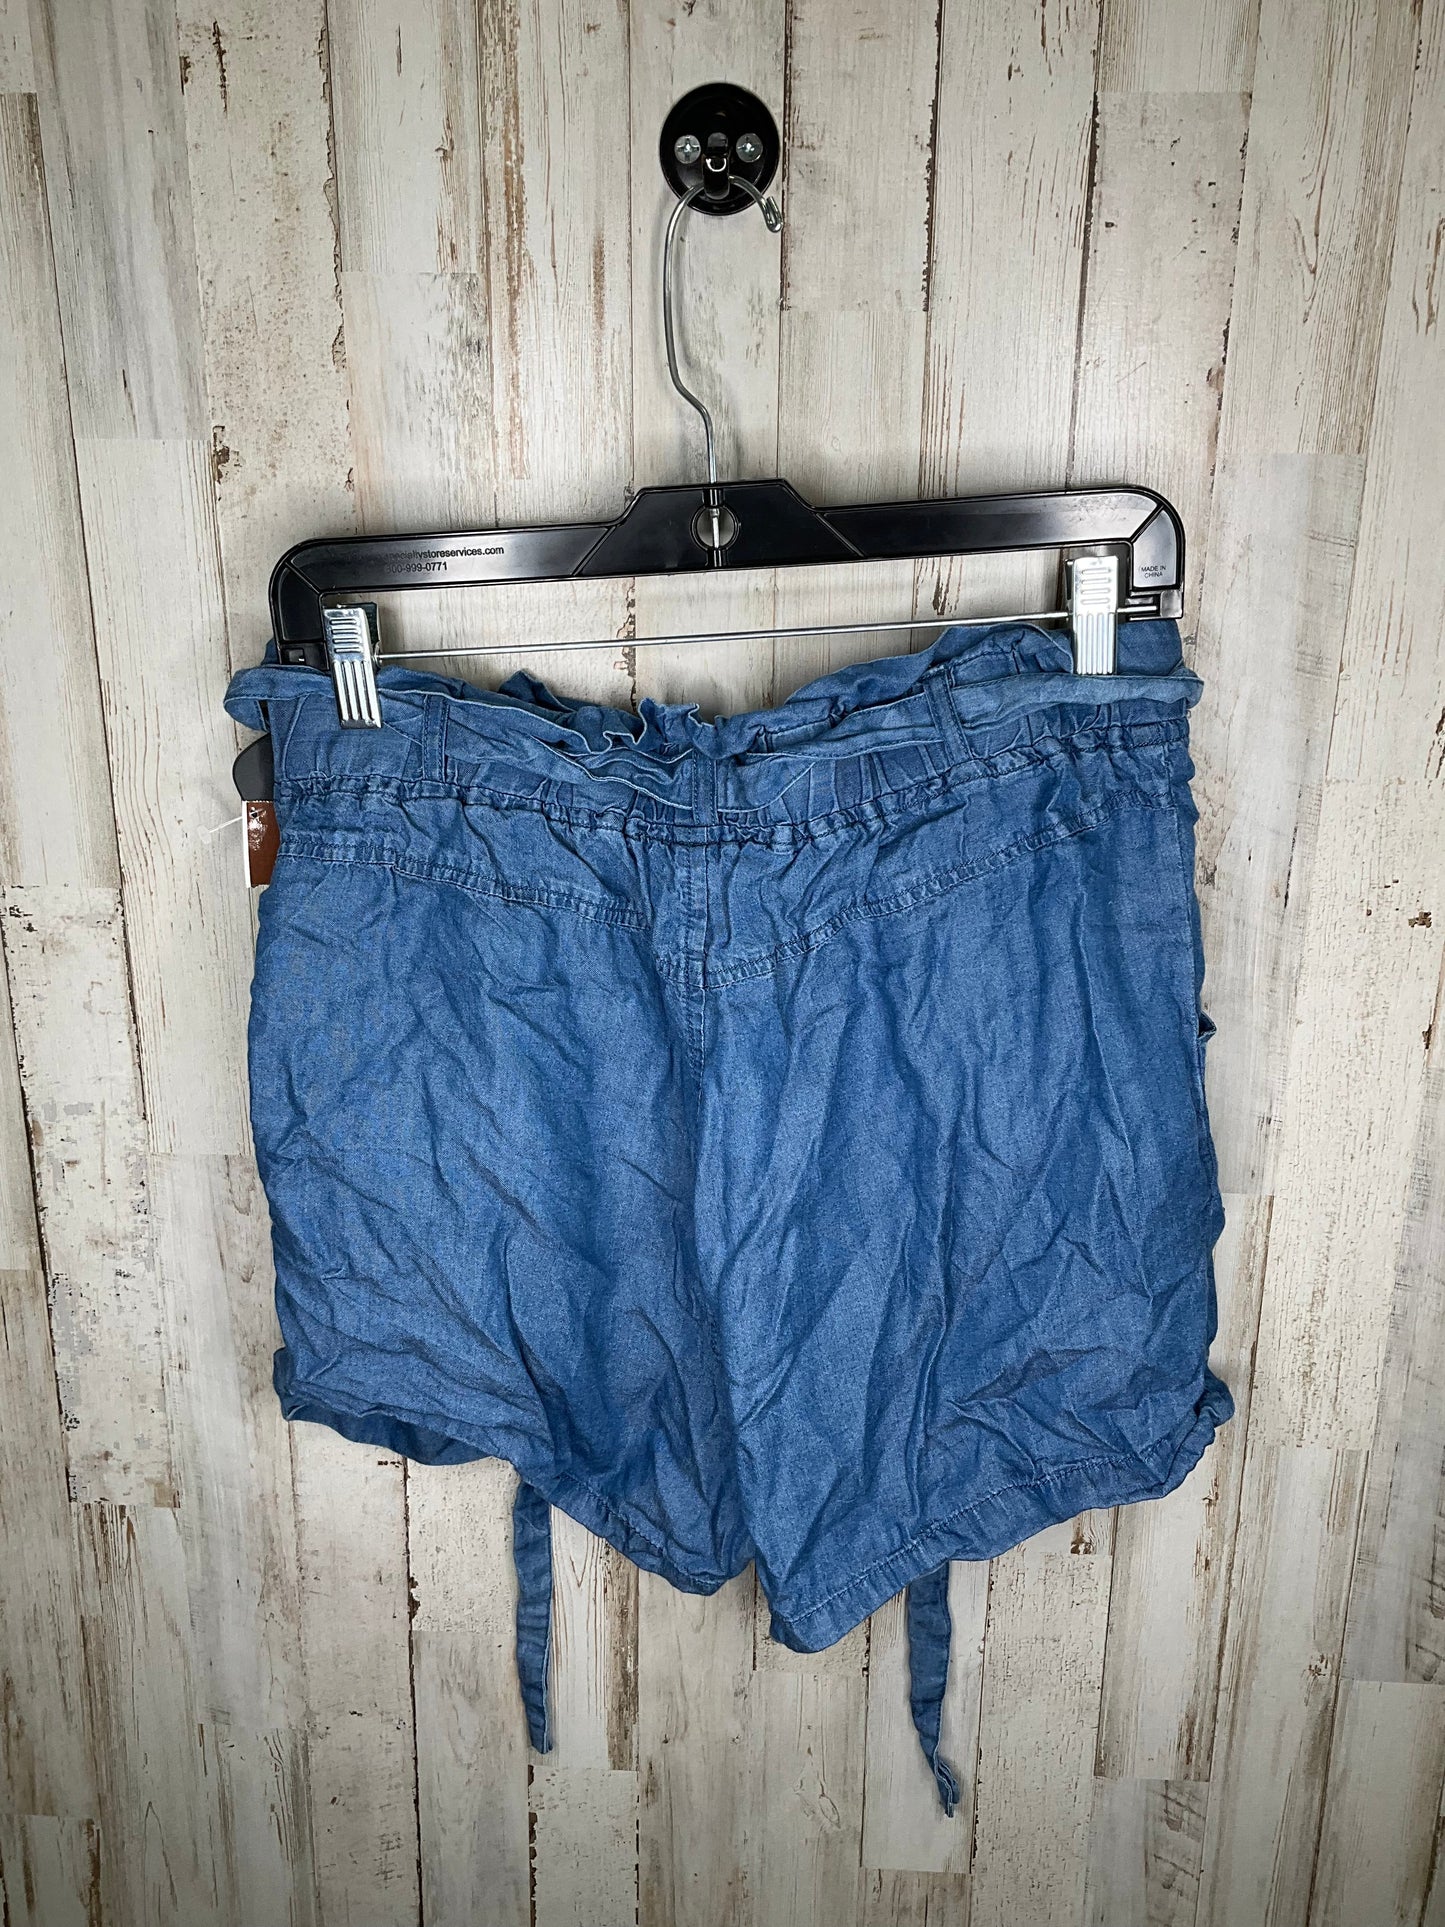 Shorts By Thread And Supply  Size: L